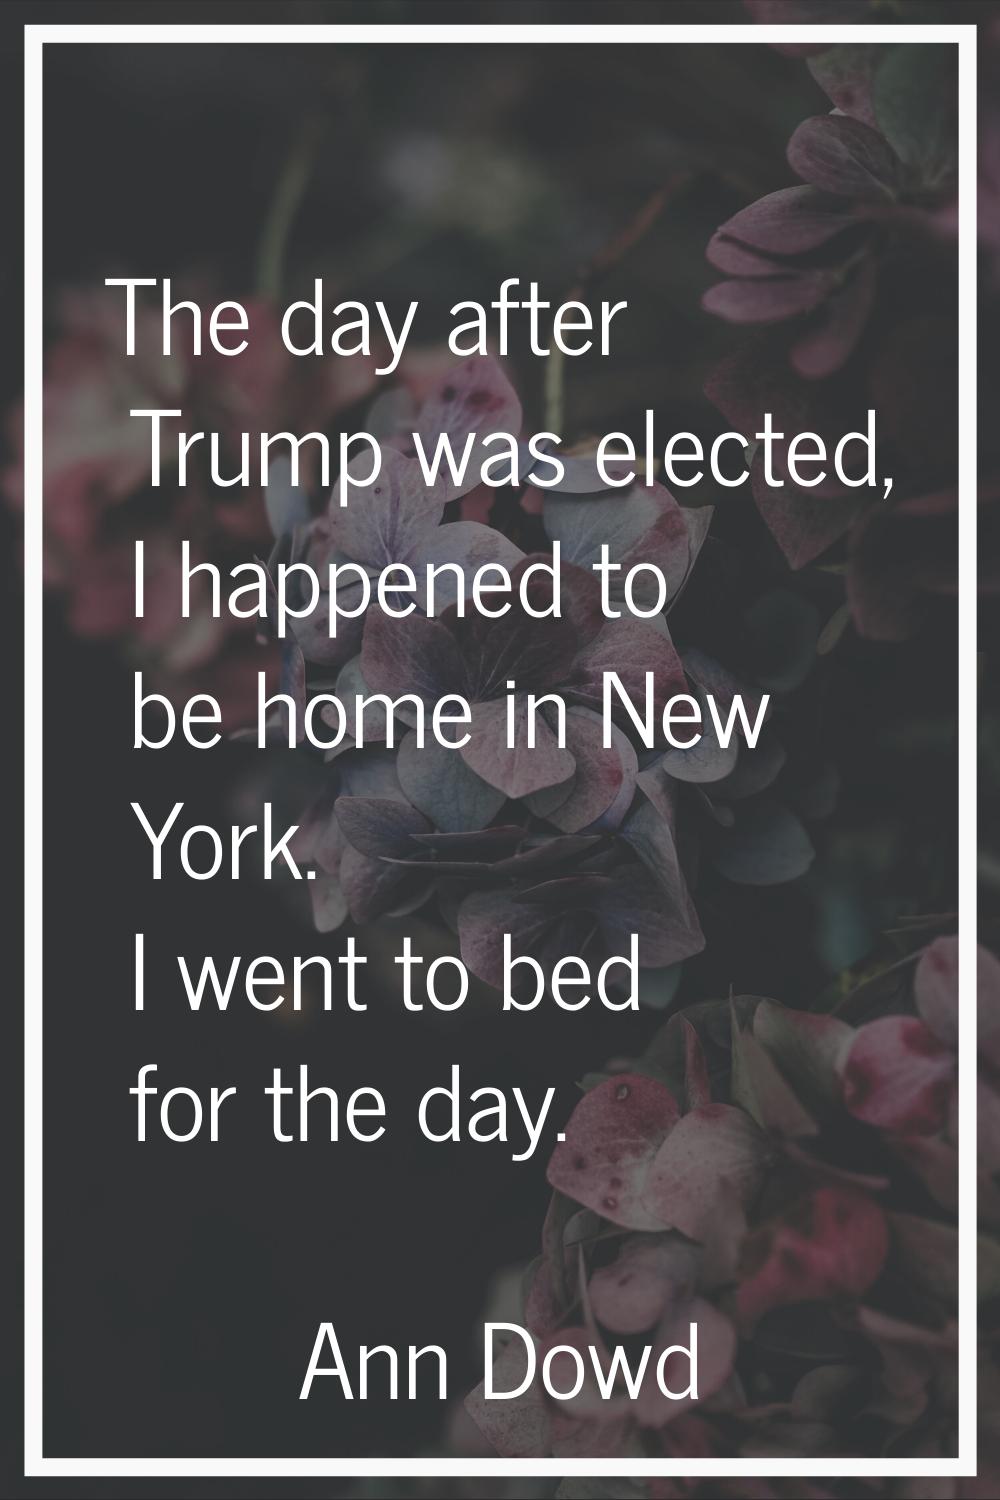 The day after Trump was elected, I happened to be home in New York. I went to bed for the day.